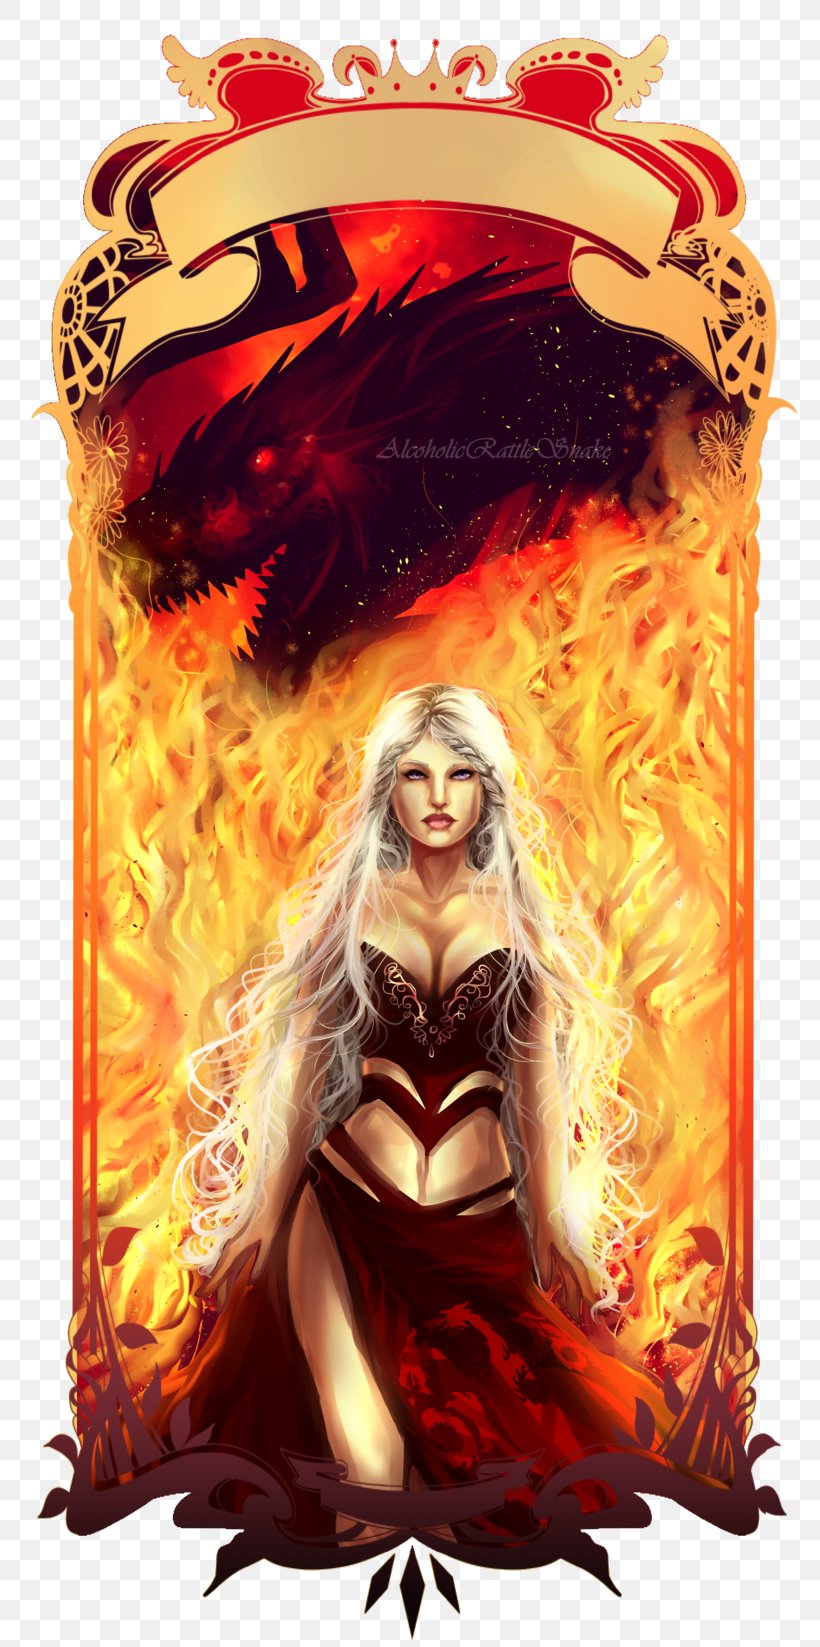 Daenerys Targaryen A Game Of Thrones Khal Drogo A Song Of Ice And Fire Jon Snow, PNG, 800x1647px, Daenerys Targaryen, Art, Character, Drogon, Game Of Thrones Download Free